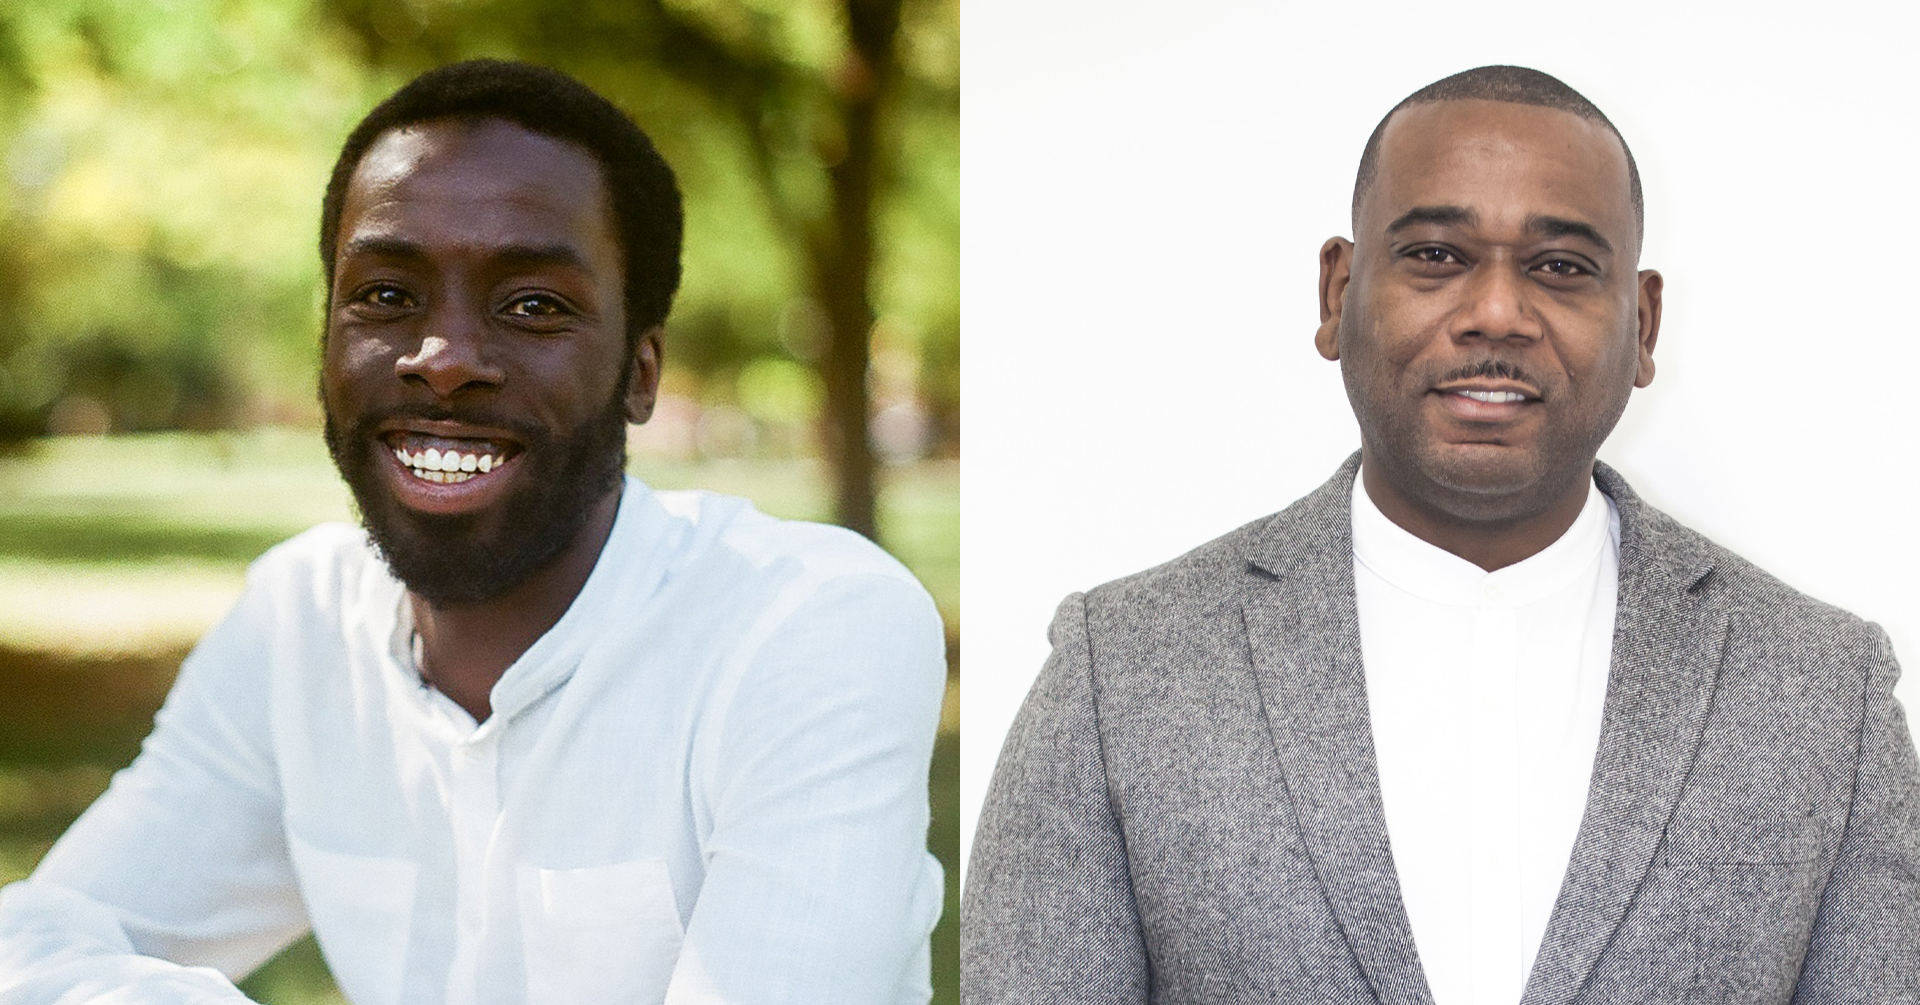 Headshots of Desmond Cole and Lee Lawrence